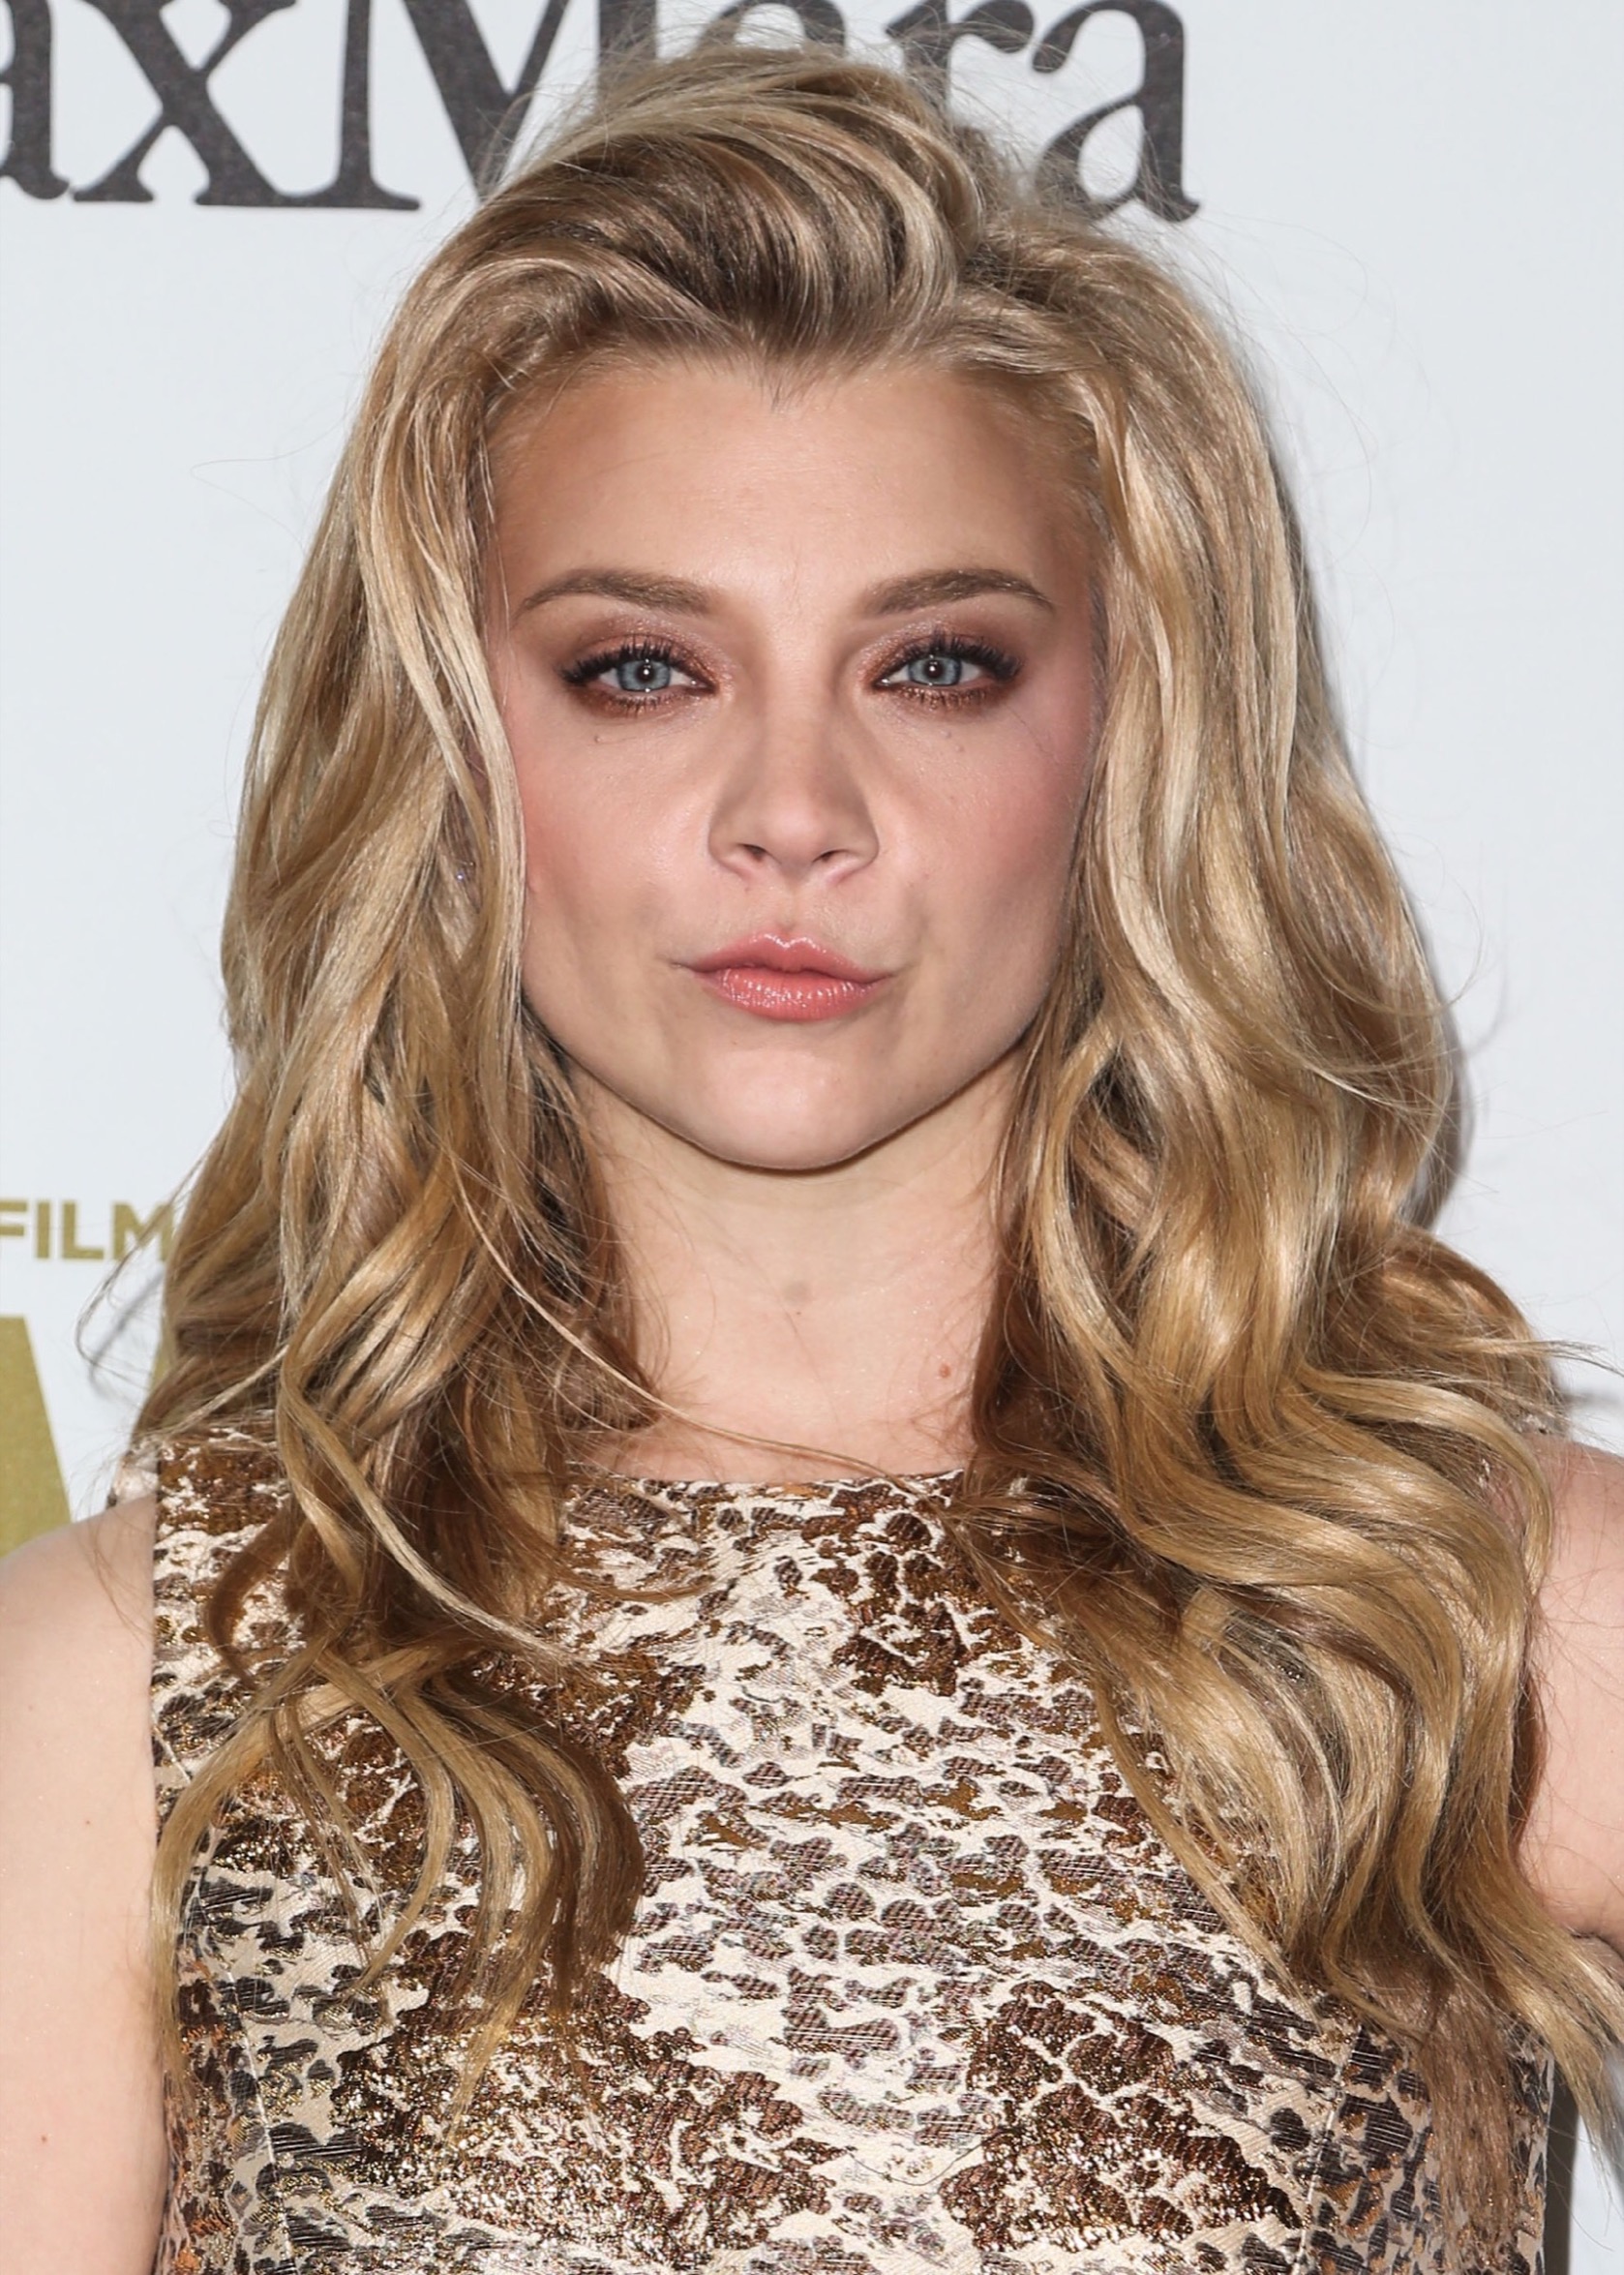 Jun 15 The 40th Annual Women In Film Crystal Lucy Awards Arrivals 455 Captivating